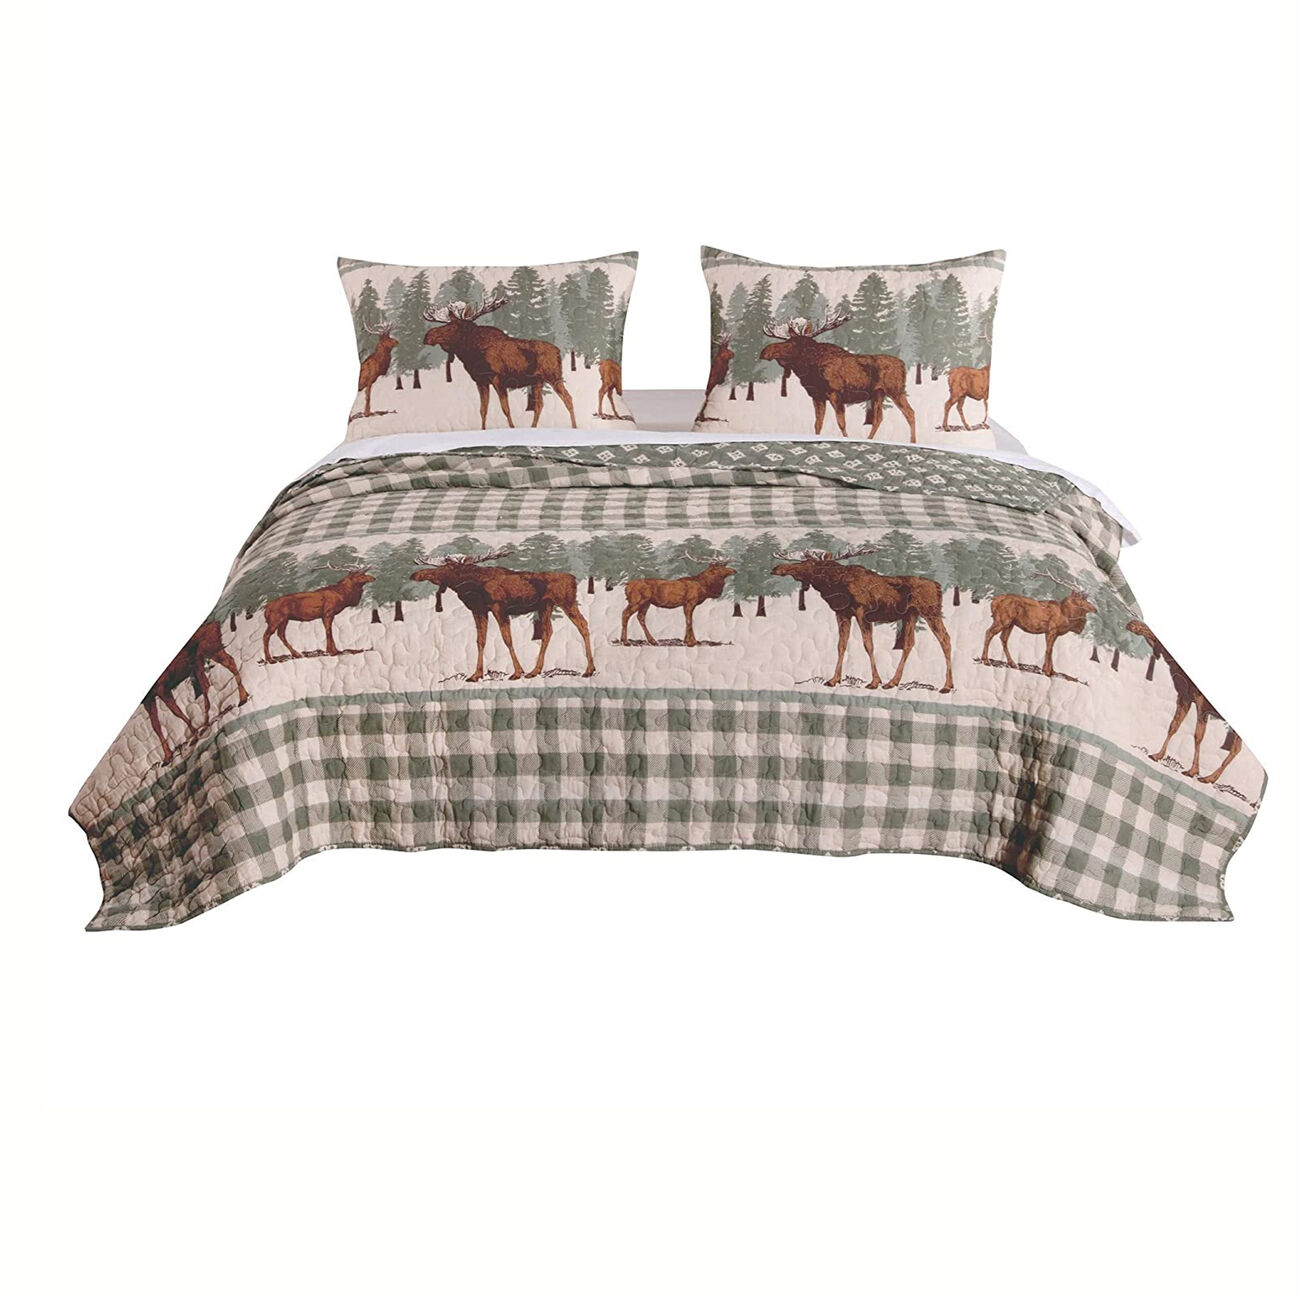 Fabric Twin Size Quilt Set with Animal and Plaid Print, Green and Brown - BM223377